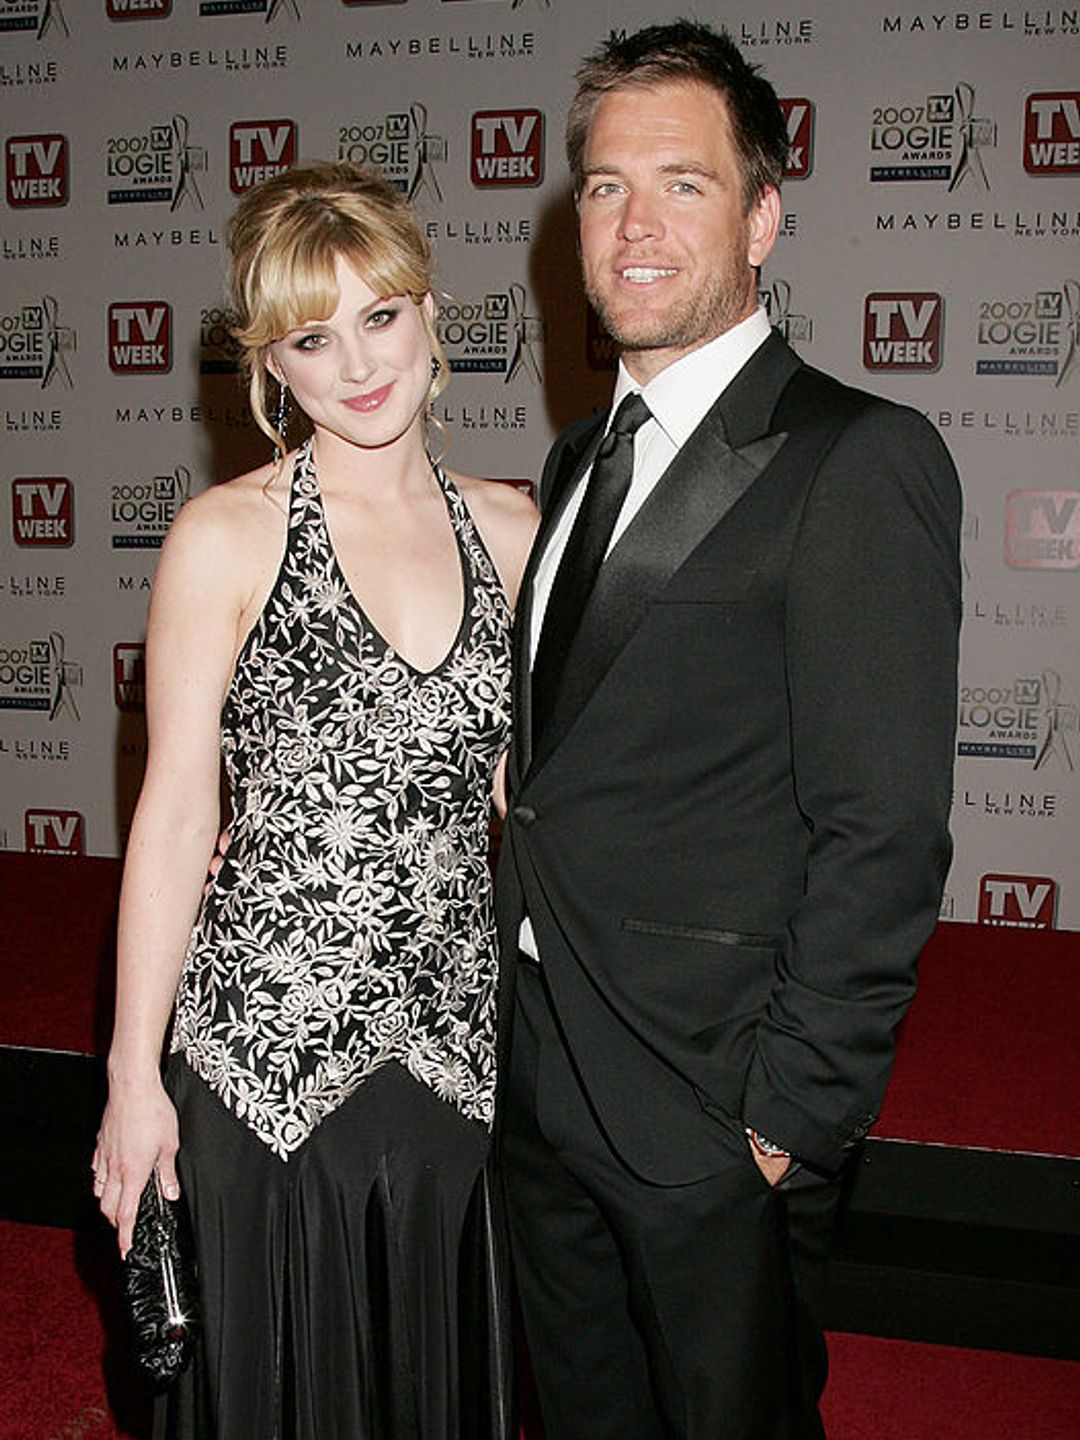 Alexandra Breckenridge and Michael Weatherly at the 2007 TV Week Logie Awards